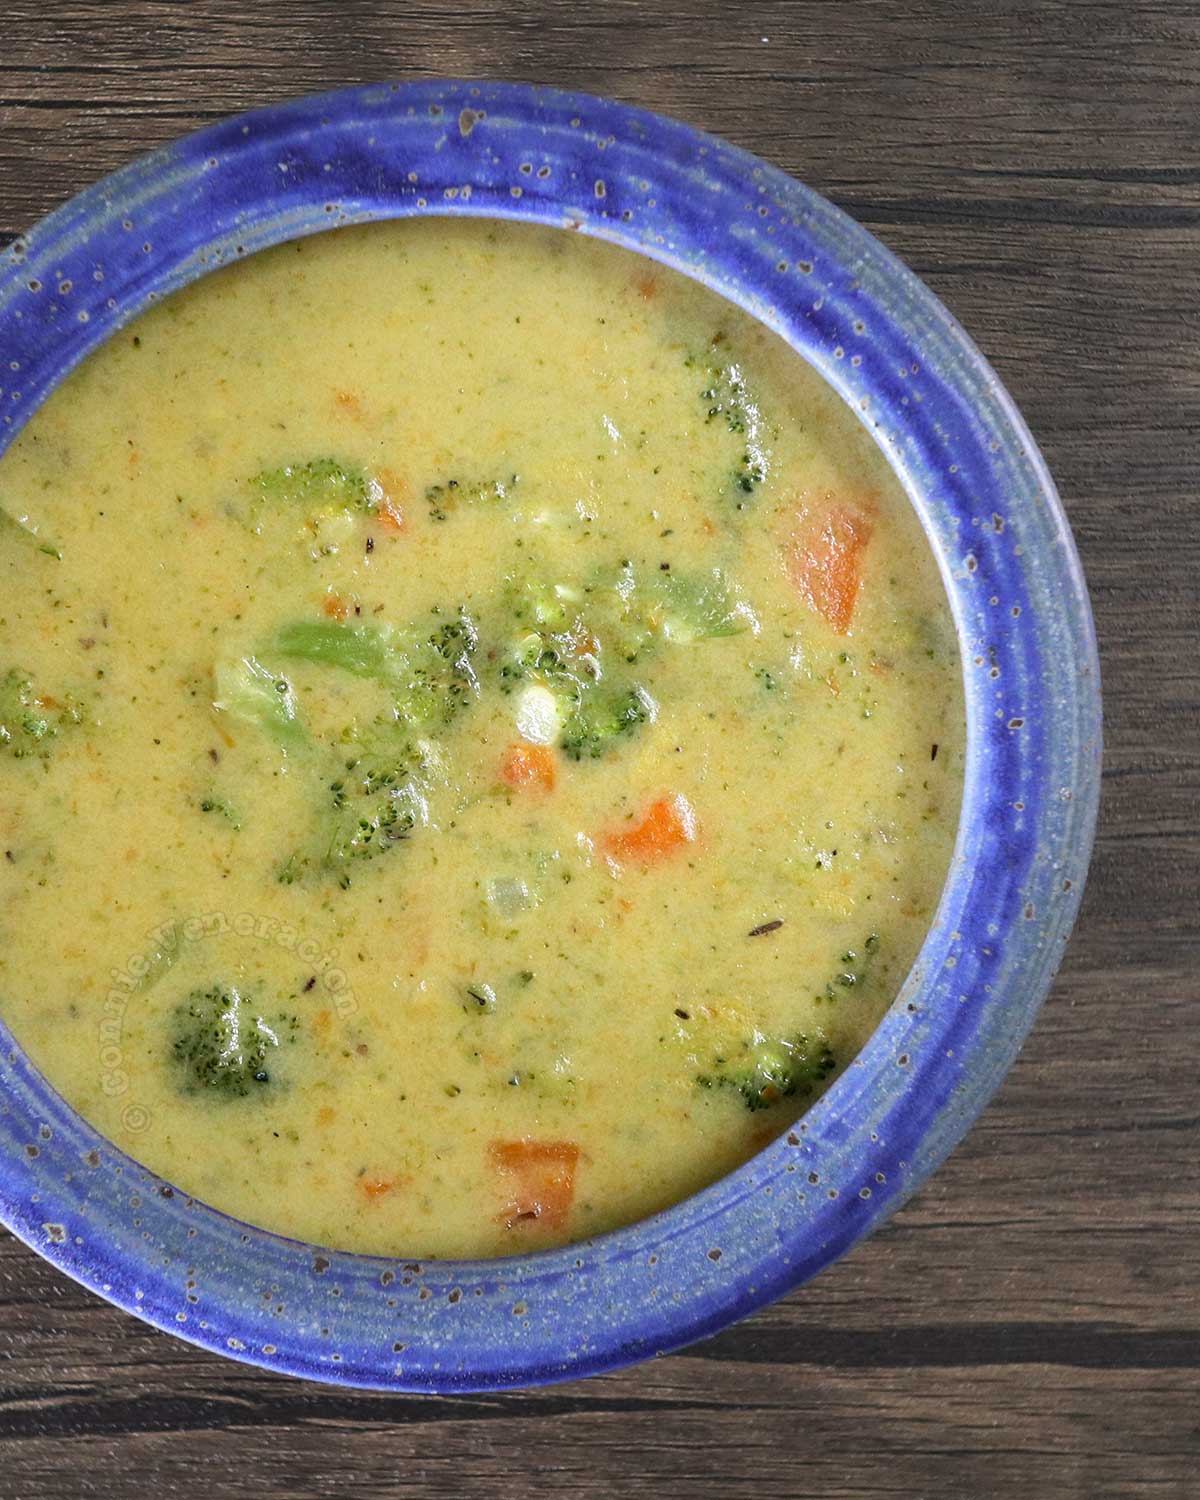 Broccoli and carrot chowder in blue stoneware bowl